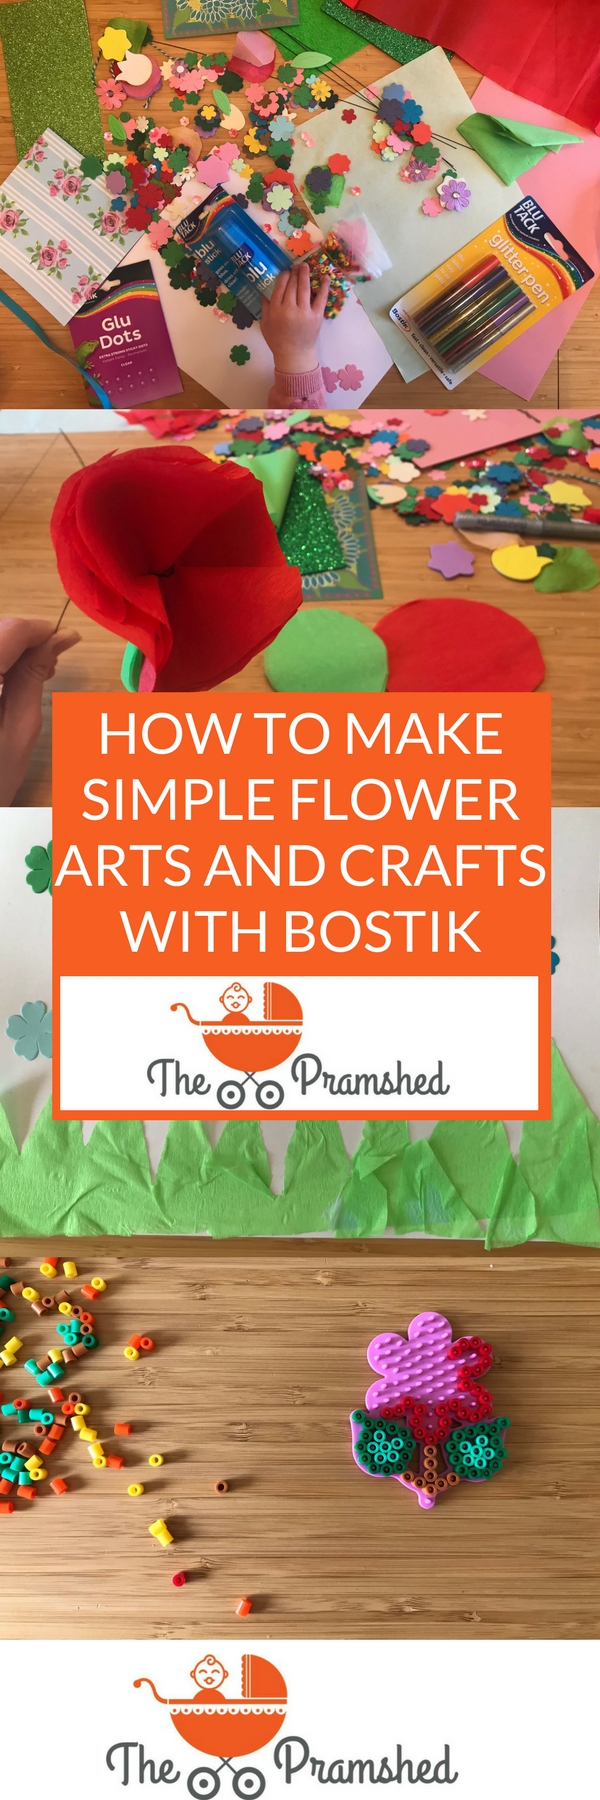 Simple Flower Arts and Crafts with Bostik